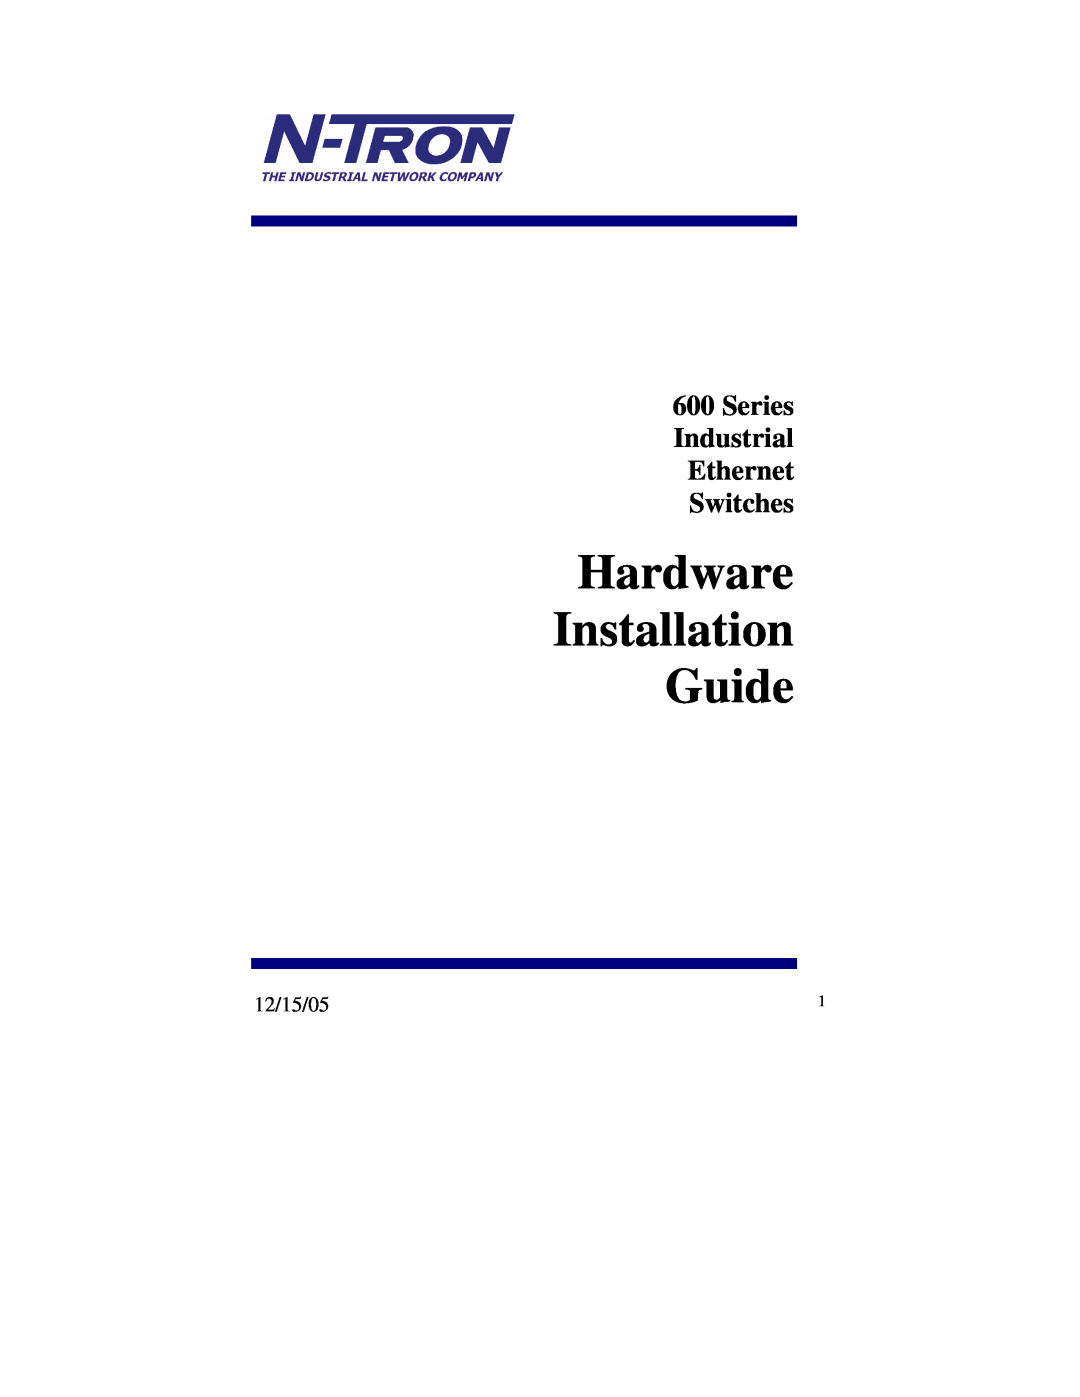 N-Tron 604MFX-ST, 608MFX-ST manual Series Industrial Ethernet Switches, 12/15/05, Hardware Installation Guide 